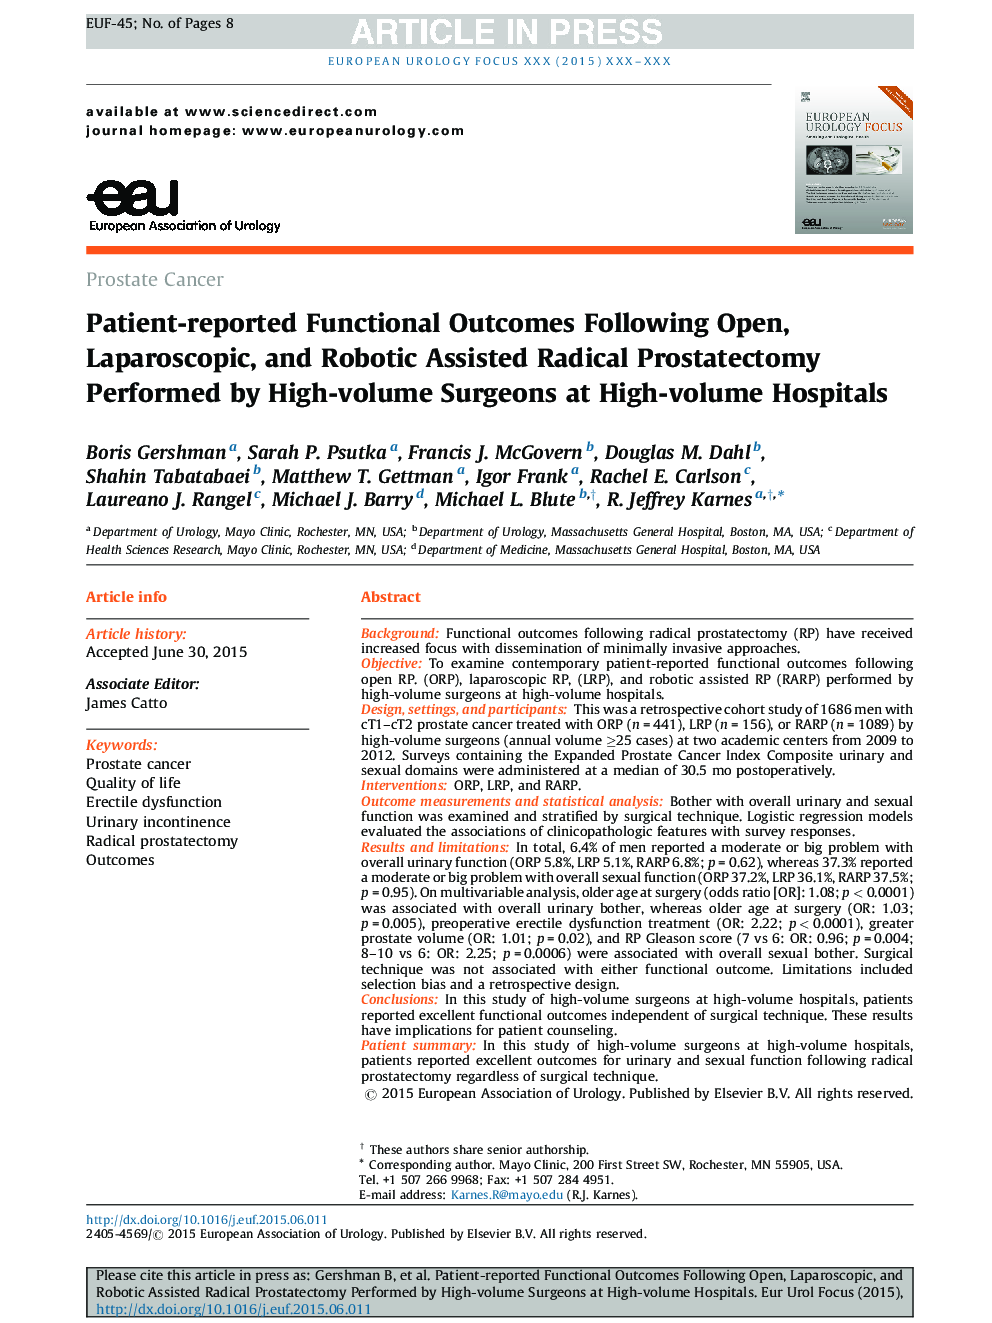 Patient-reported Functional Outcomes Following Open, Laparoscopic, and Robotic Assisted Radical Prostatectomy Performed by High-volume Surgeons at High-volume Hospitals